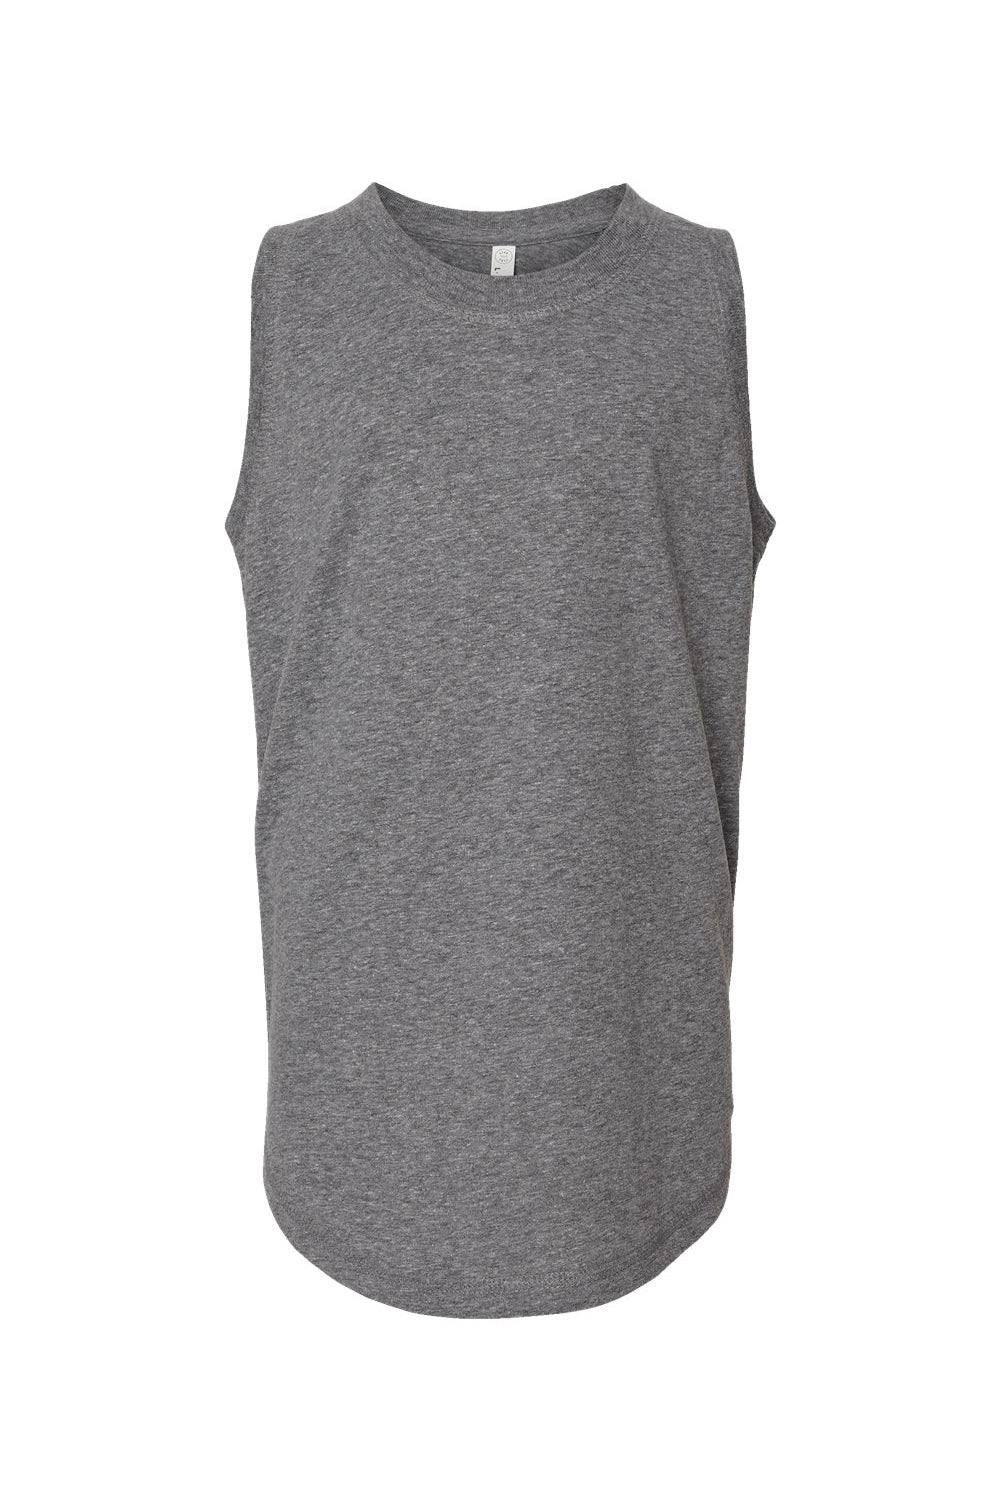 LAT 2692 Youth Girls Relaxed Fine Jersey Tank Taop Heather Granite Grey Flat Front